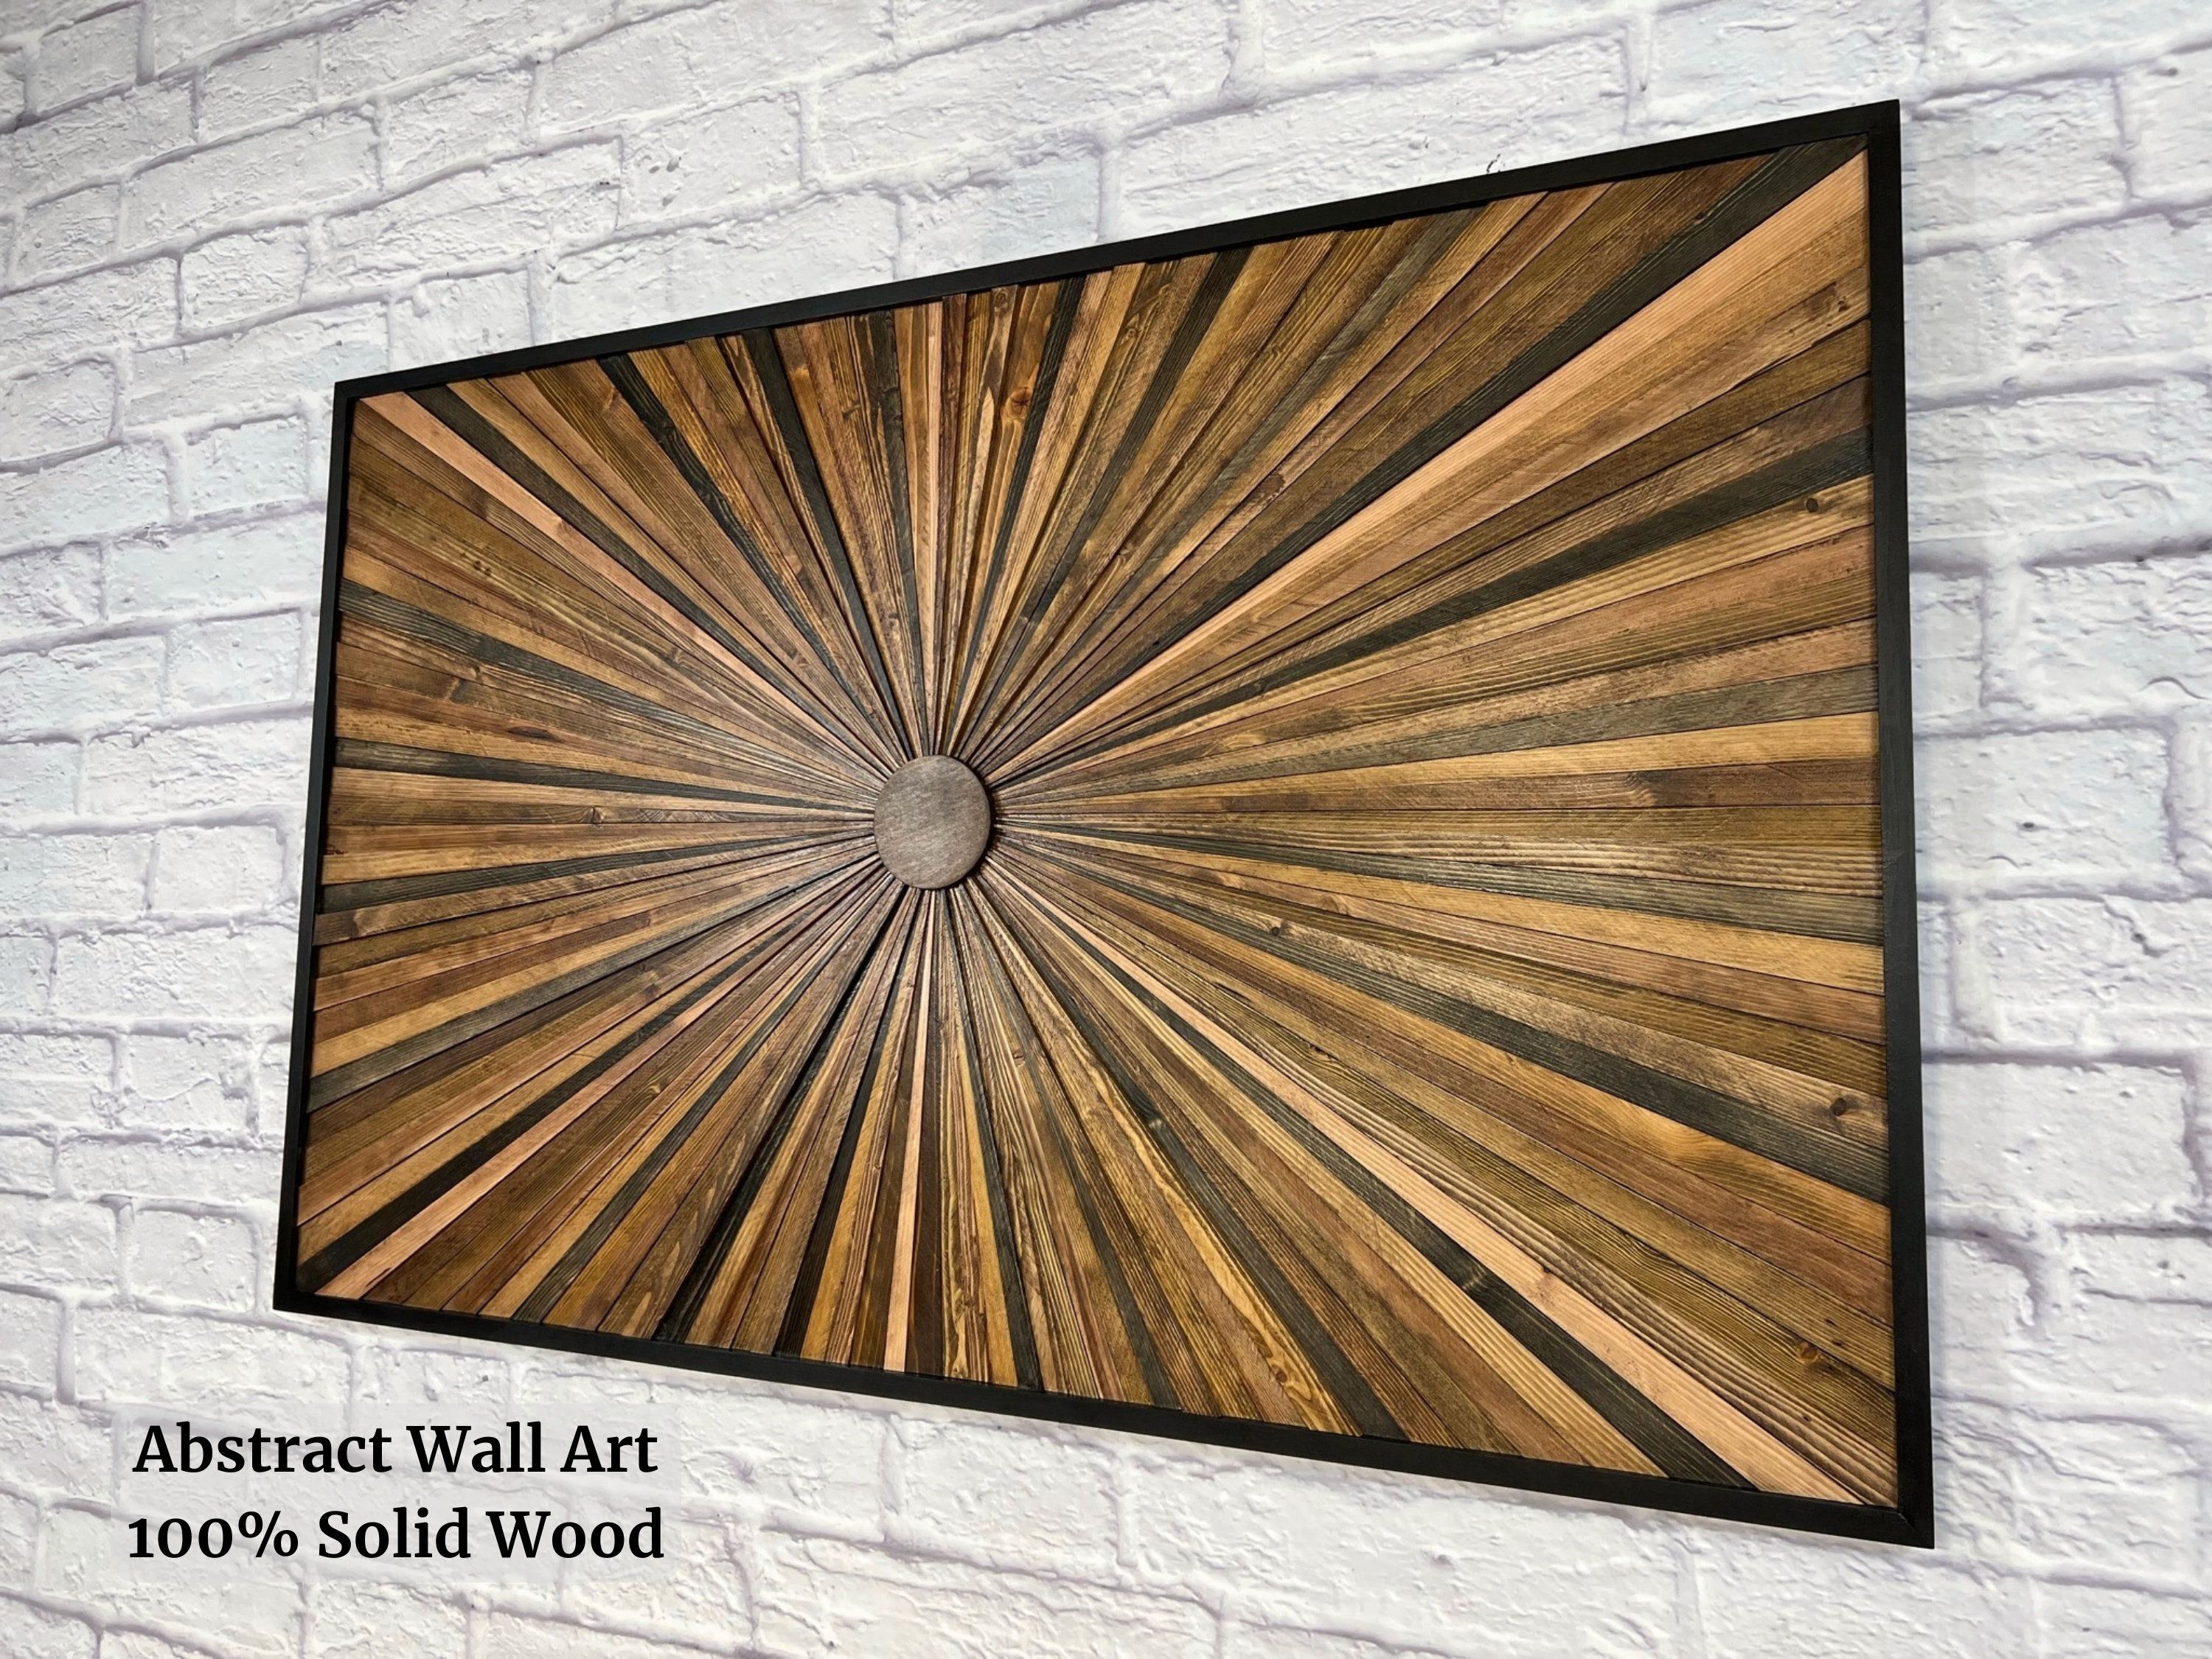 Geometric Wood Wall Art, Unique Wood Wall Decor, Rustic Wall Art, Large Wall  Hanging Decor, 100% Solid Wood Wall Decor, Abstract Art Decor Regarding Rustic Decorative Wall Art (View 10 of 15)